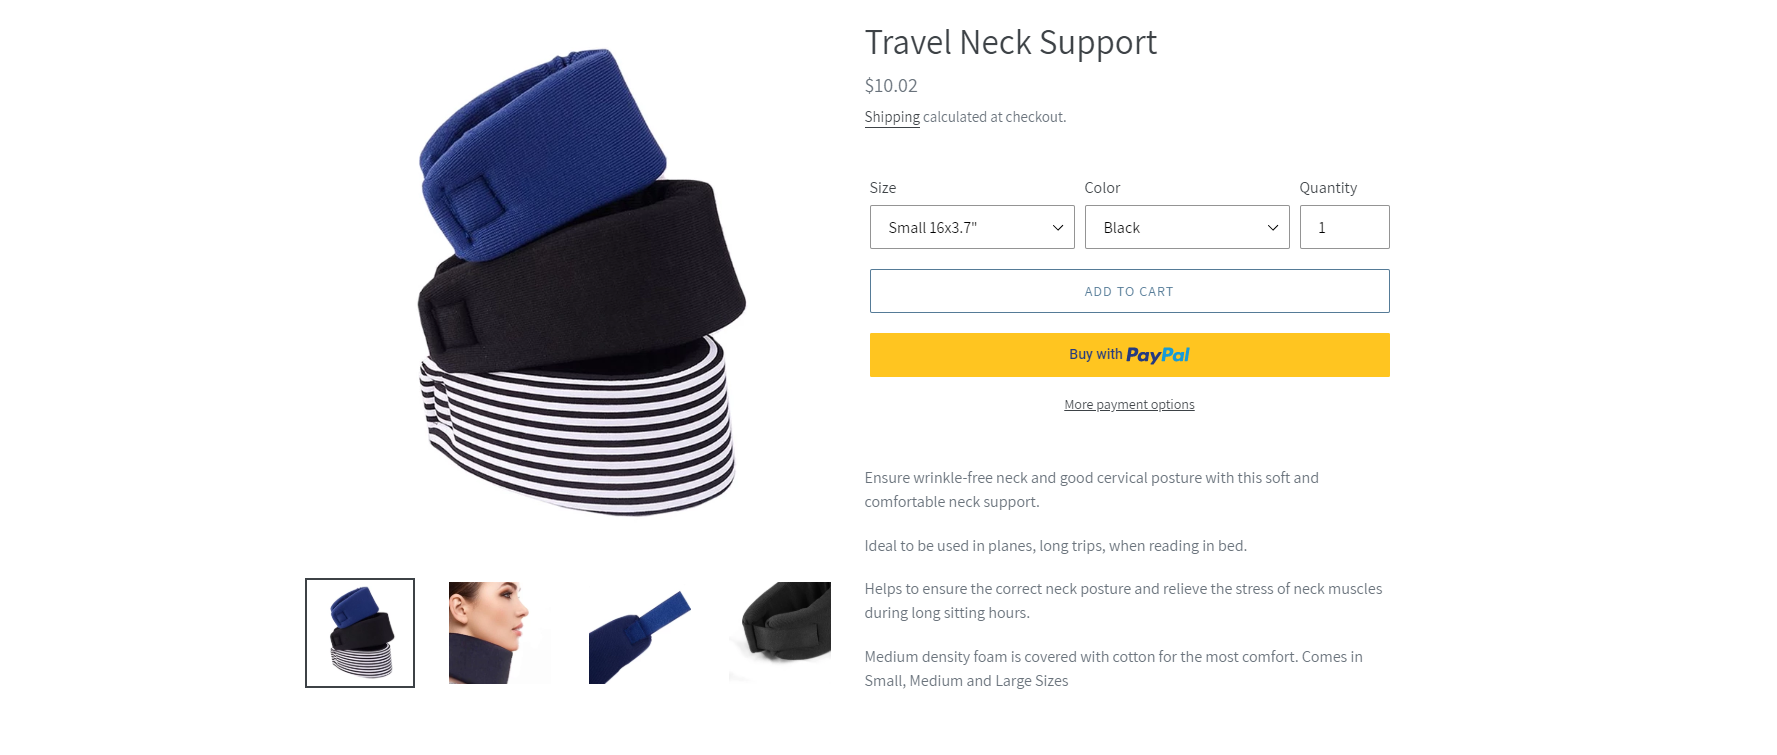 skin aging travel neck support